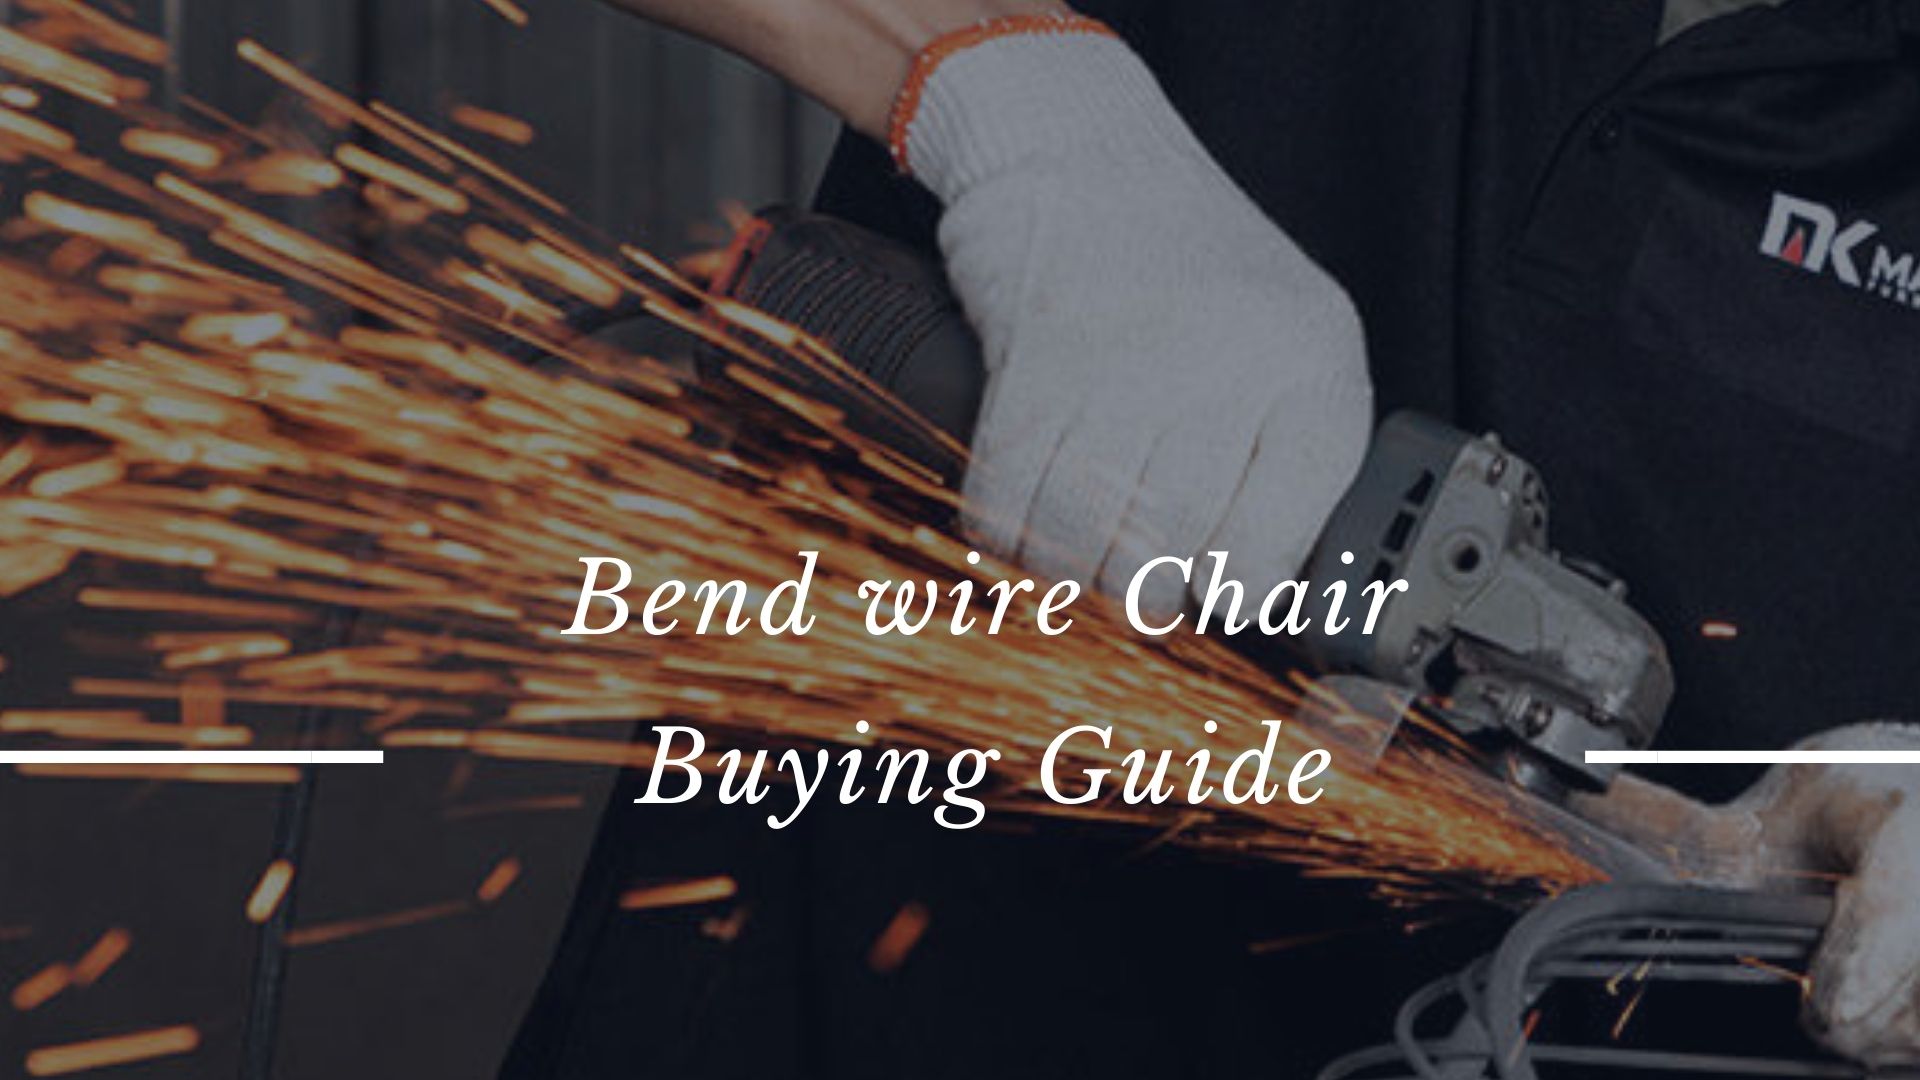 Bend wire Chair Buying Guide